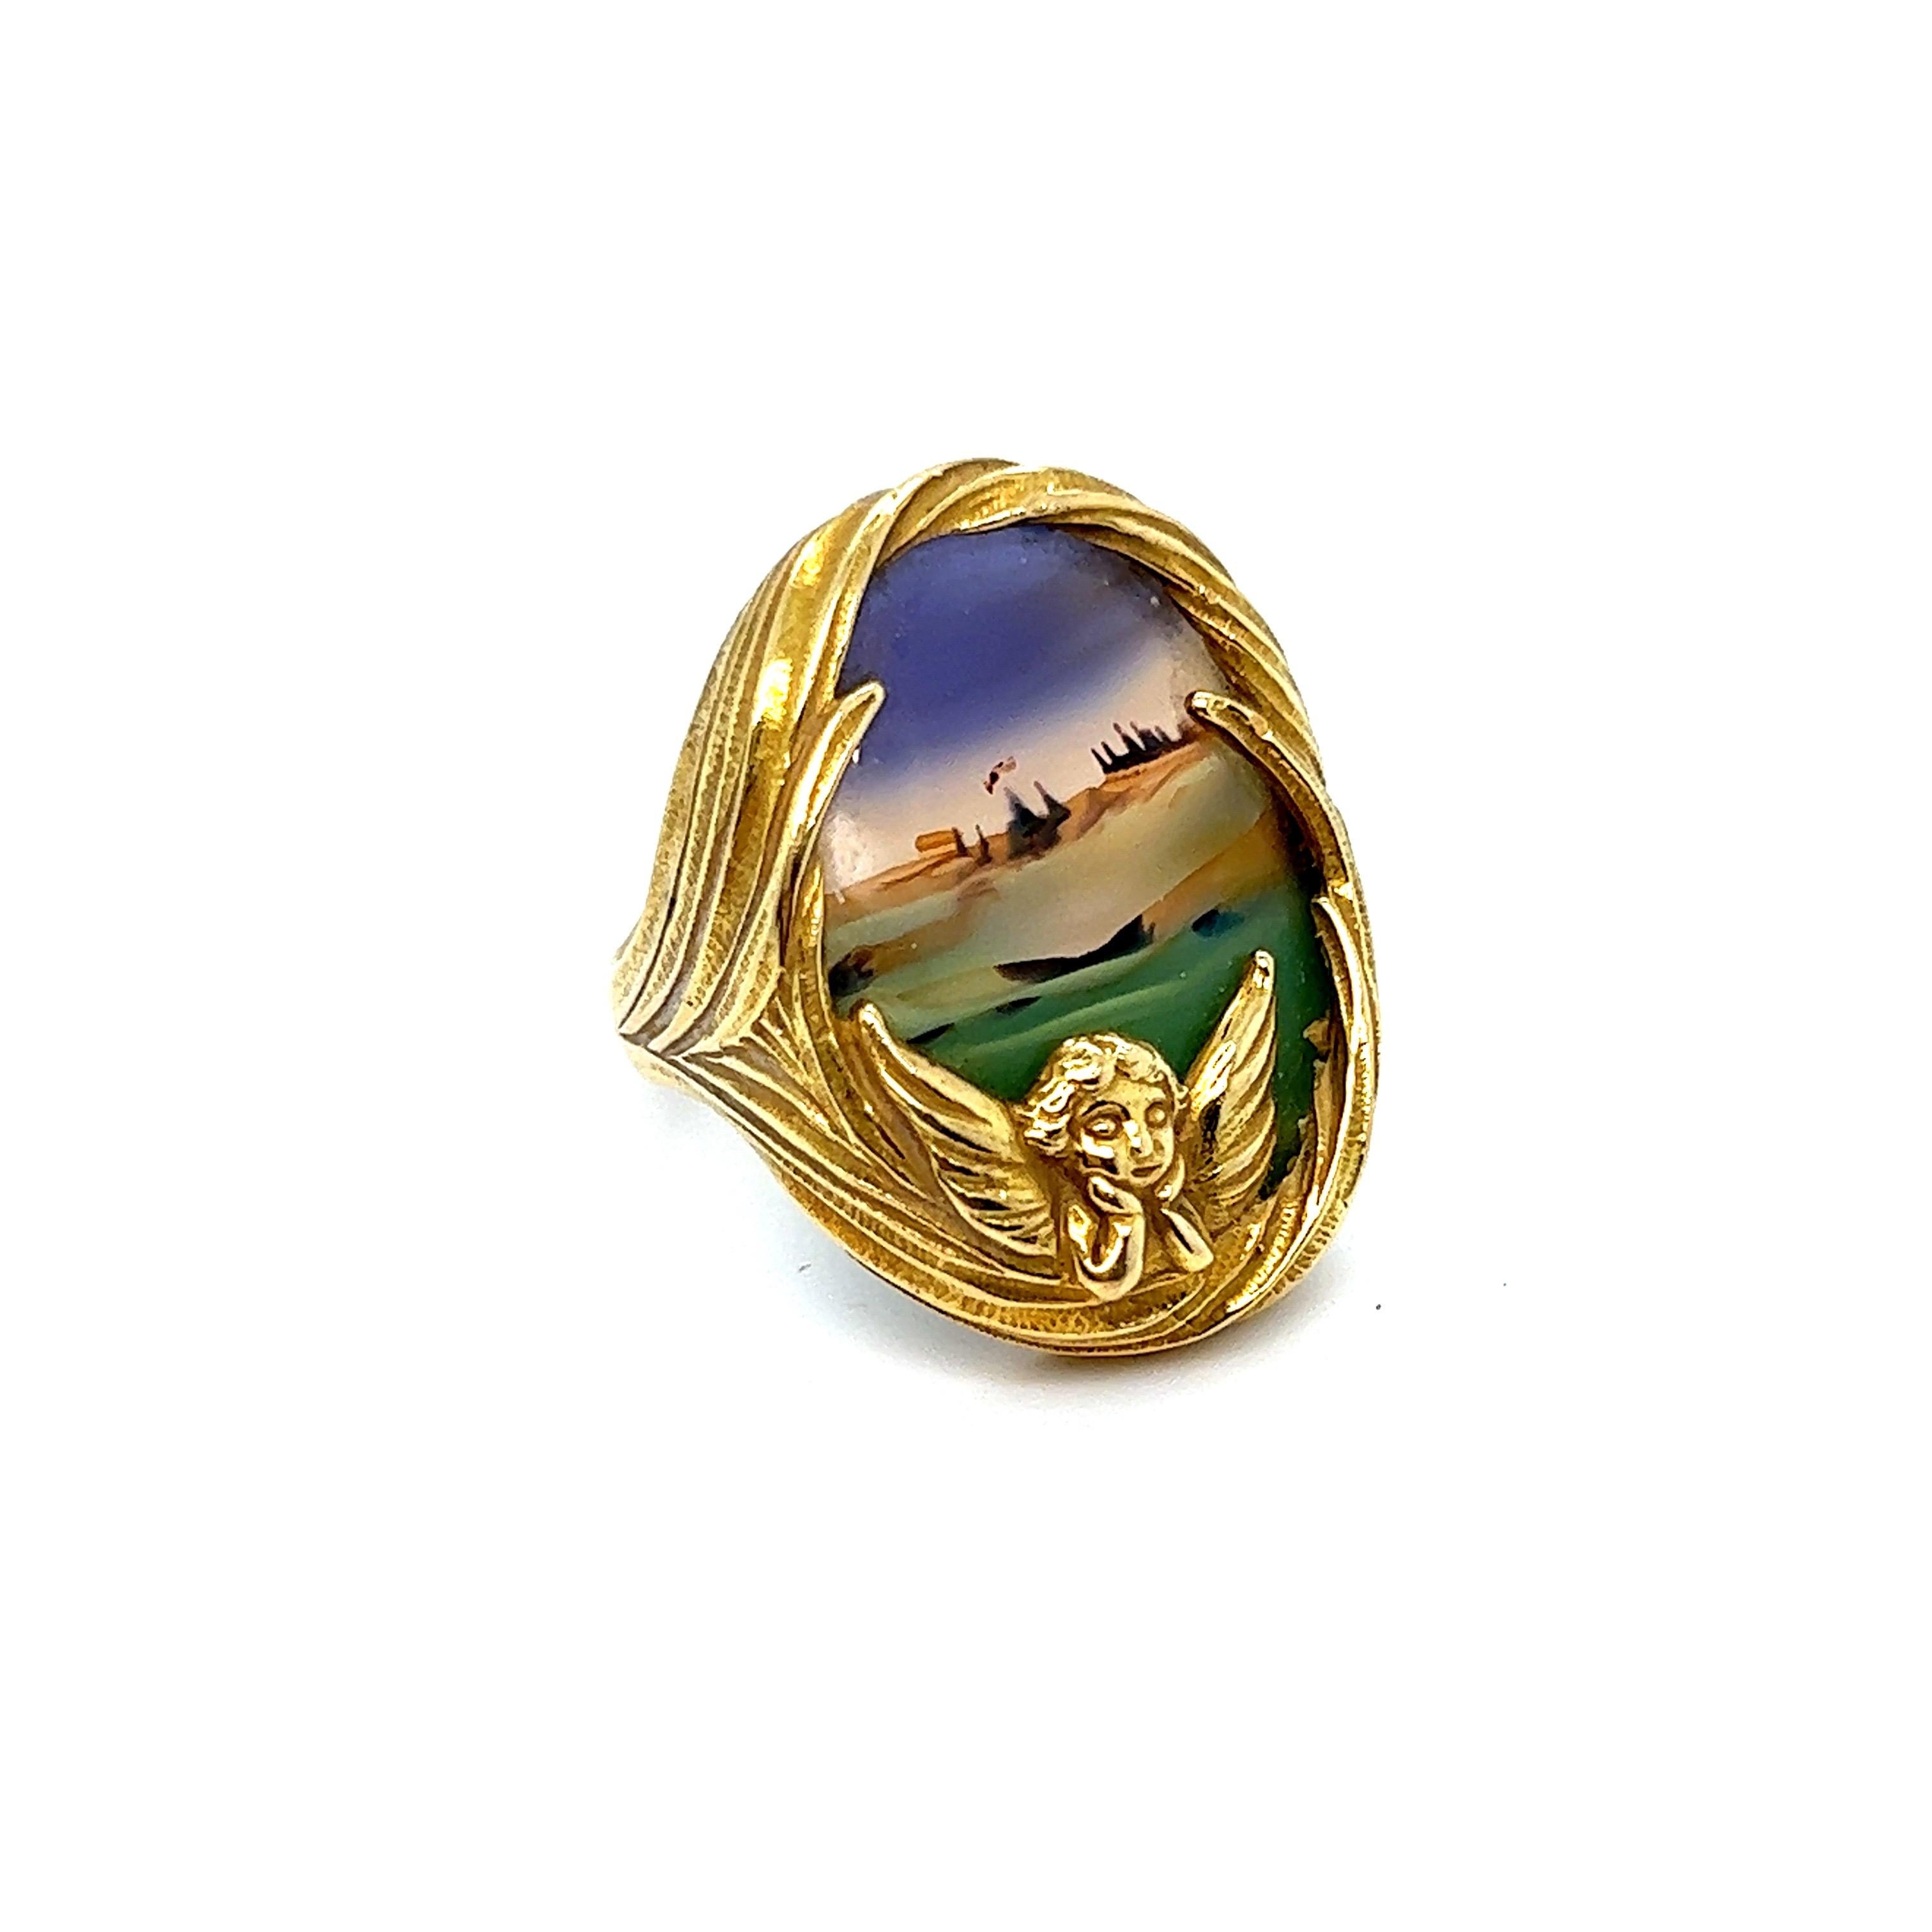 Hi there Gorgeous! I knew when I saw this special, one of kind, piece I had to have her. Crafted in 18K Yellow Gold, the ring features a stunning and beautiful landscape agate, set into a whimsical flowing ring with a cherub looking on. Very well